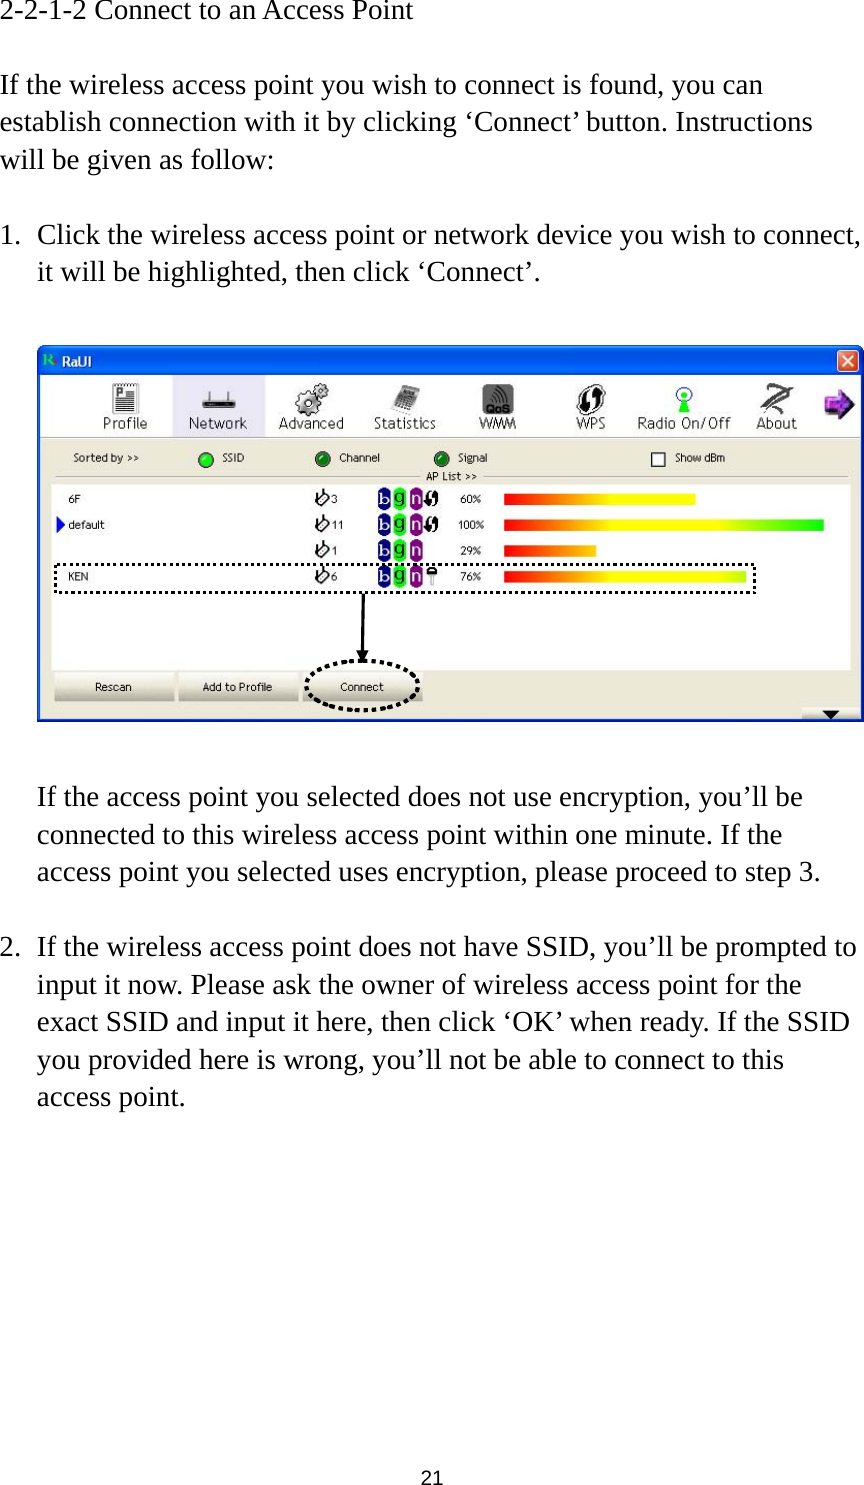  21 2-2-1-2 Connect to an Access Point  If the wireless access point you wish to connect is found, you can establish connection with it by clicking ‘Connect’ button. Instructions will be given as follow:  1. Click the wireless access point or network device you wish to connect, it will be highlighted, then click ‘Connect’.    If the access point you selected does not use encryption, you’ll be connected to this wireless access point within one minute. If the access point you selected uses encryption, please proceed to step 3.  2. If the wireless access point does not have SSID, you’ll be prompted to input it now. Please ask the owner of wireless access point for the exact SSID and input it here, then click ‘OK’ when ready. If the SSID you provided here is wrong, you’ll not be able to connect to this access point. 